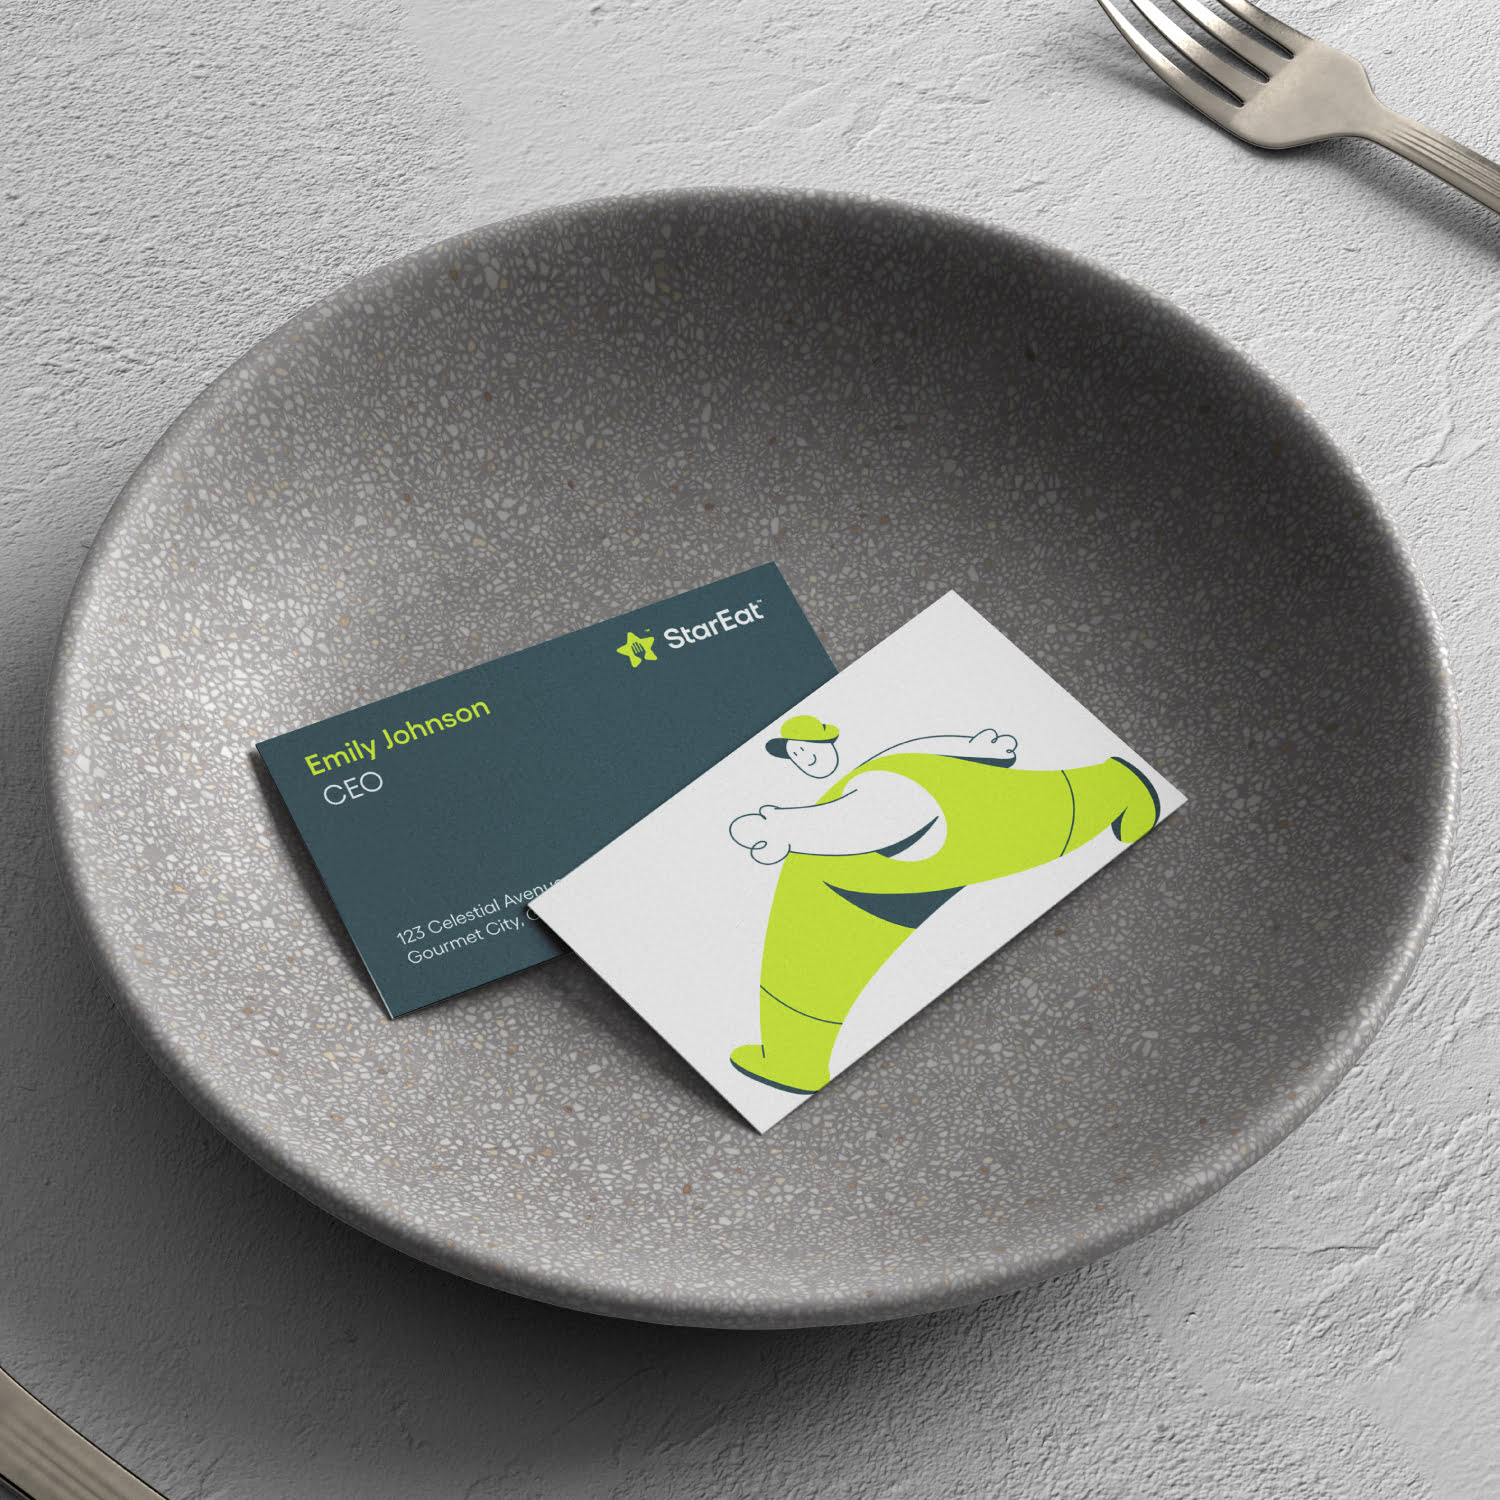 StarEat logo Business card design with a mockup